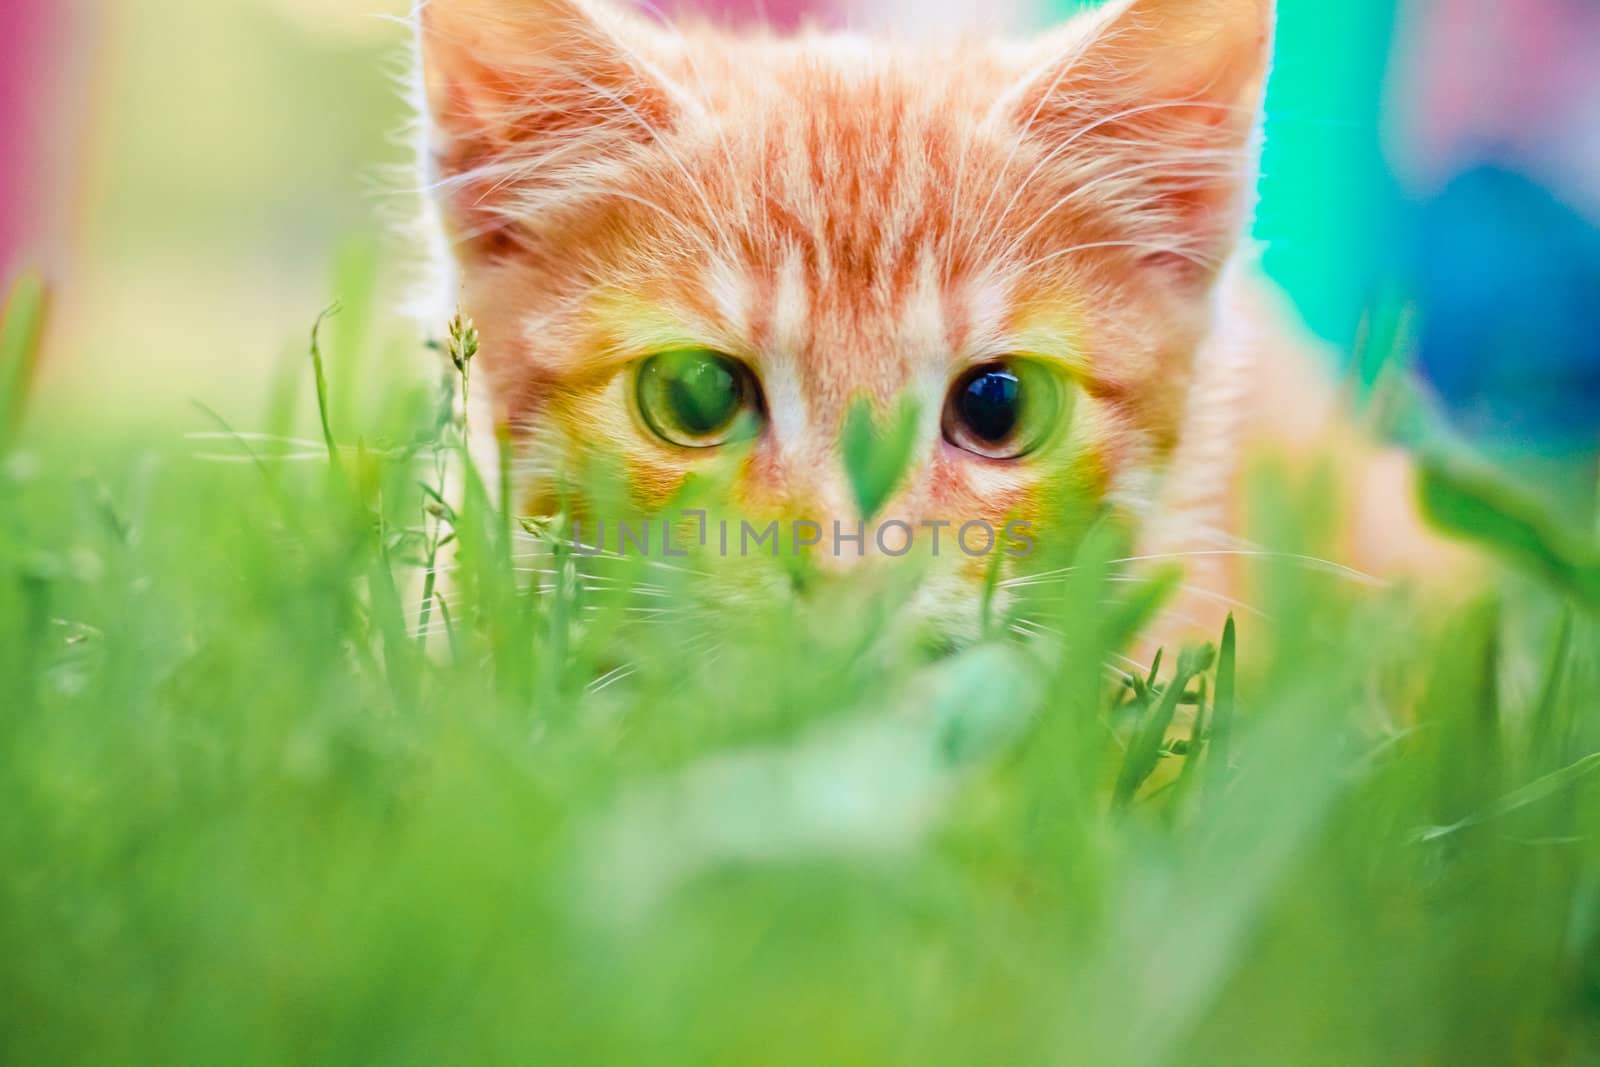 Young kitten in grass outdoor shot at sunny day